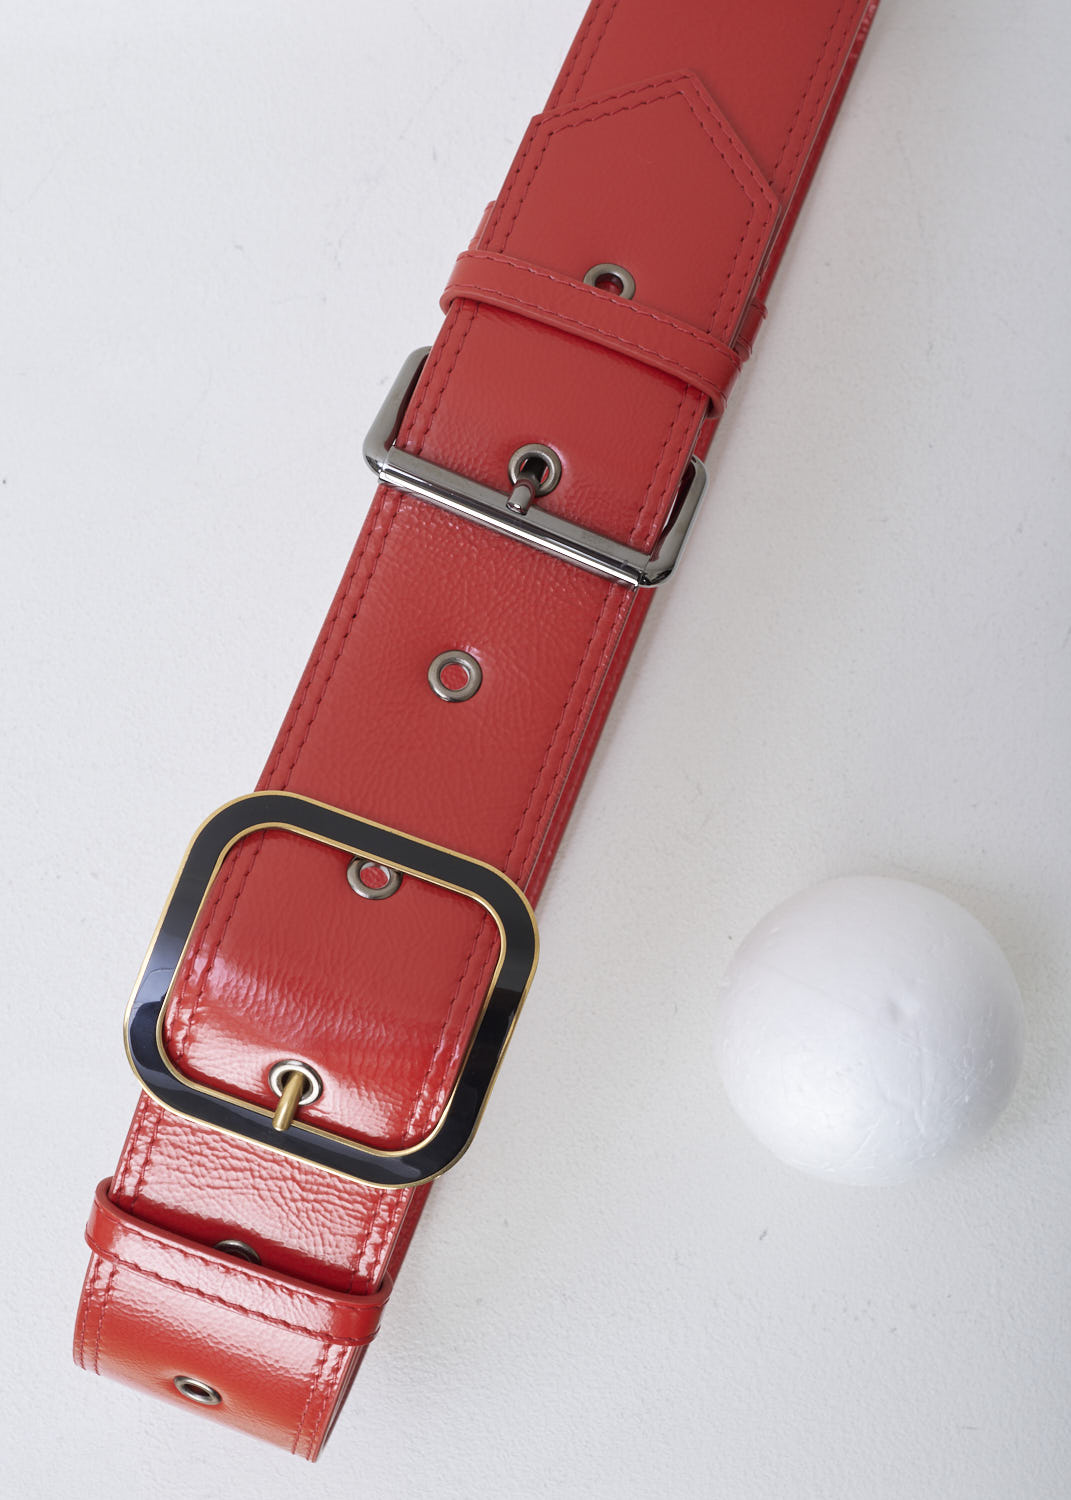 MARNI, BROAD RED BELT WITH A DOUBLE BUCKLE DETAIL, CNMO0050Q0_P2904_Z2F67, Red, Front 1, Broad naplak leather belt in a scarlet red color. The belt has a double buckle detail: one buckle is silver, the other is black with a gold trim. 
